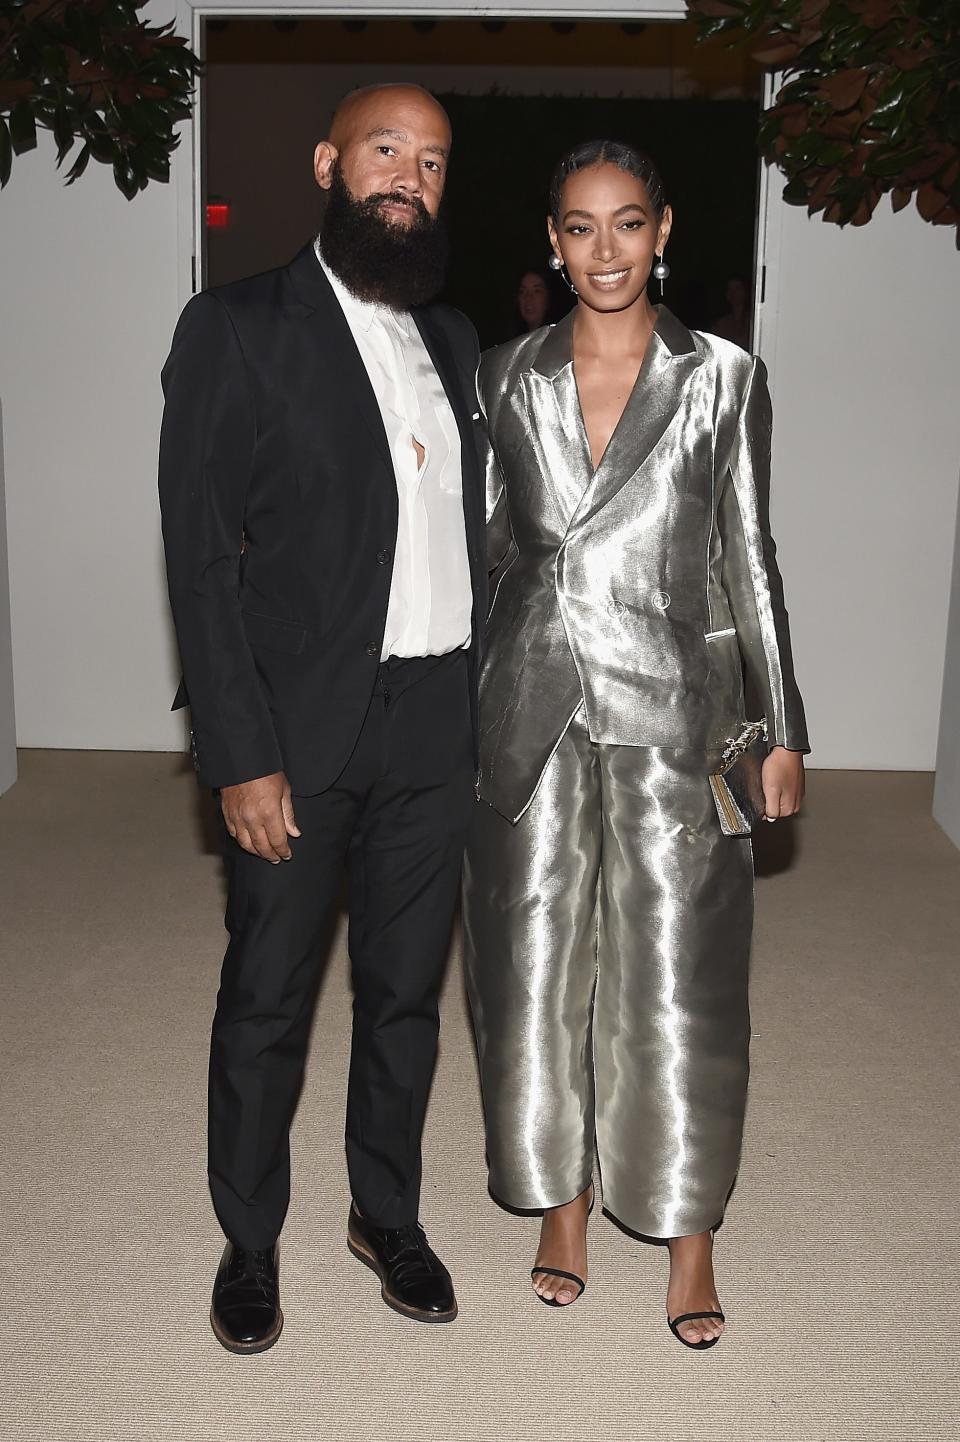 Alan Ferguson and Solange Knowles have "separated and parted ways," according to a post on the singer's Instagram. The two married in Nov. of 2014.